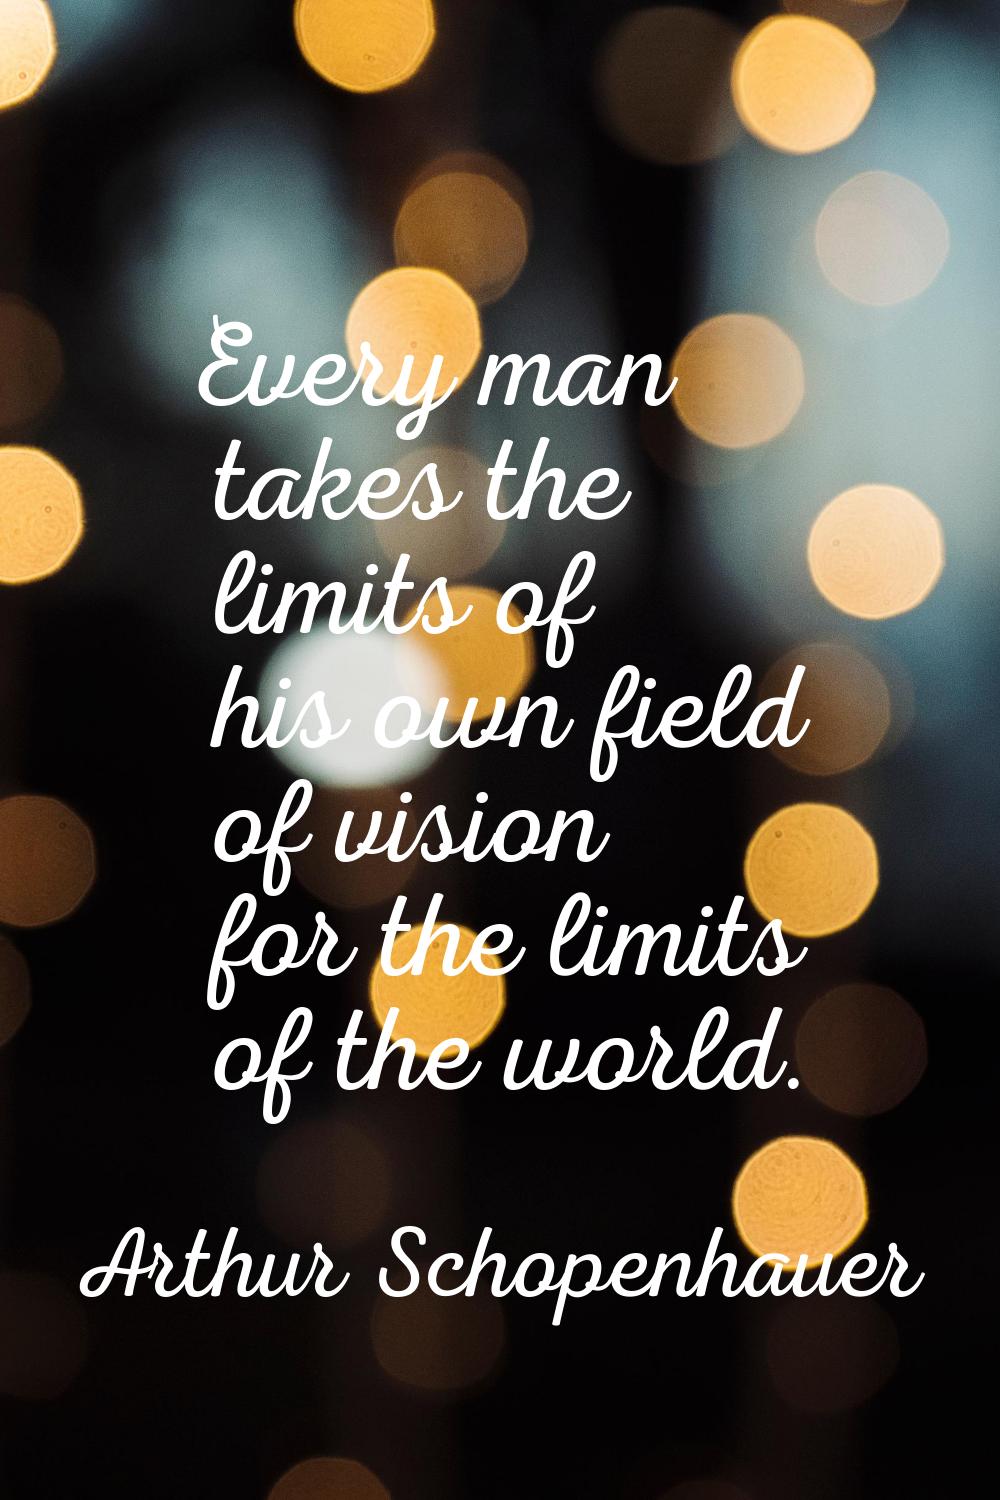 Every man takes the limits of his own field of vision for the limits of the world.